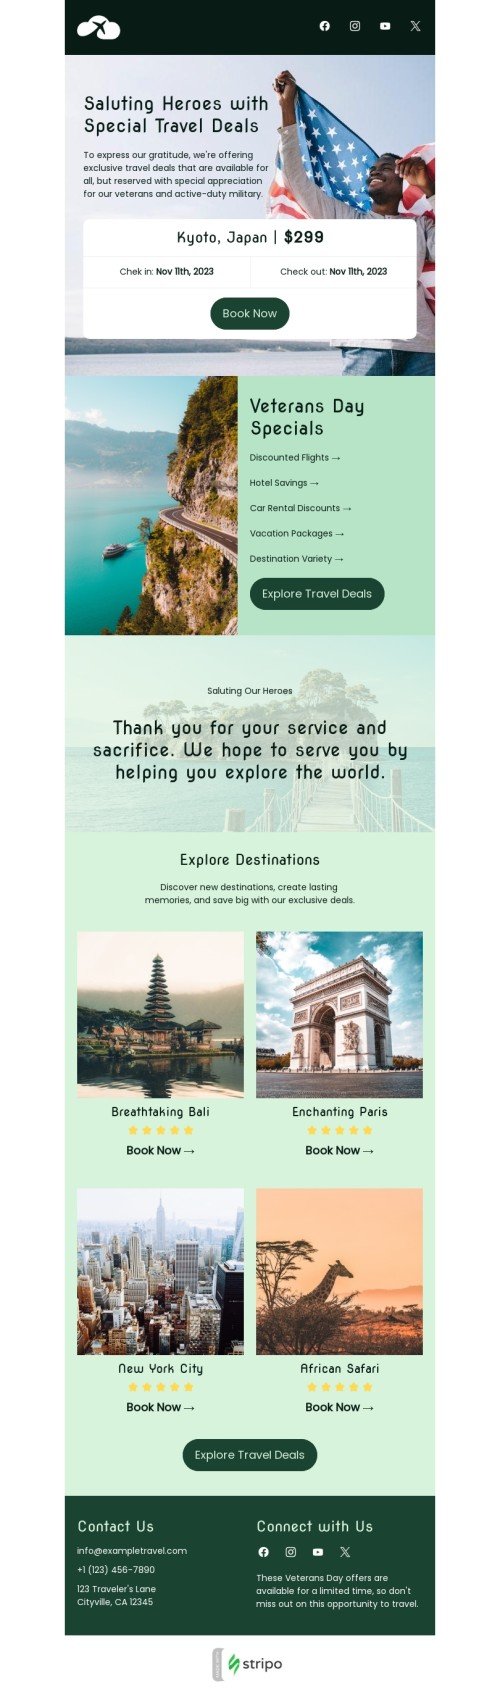 Veterans Day email template "Saluting heroes" for travel industry desktop view